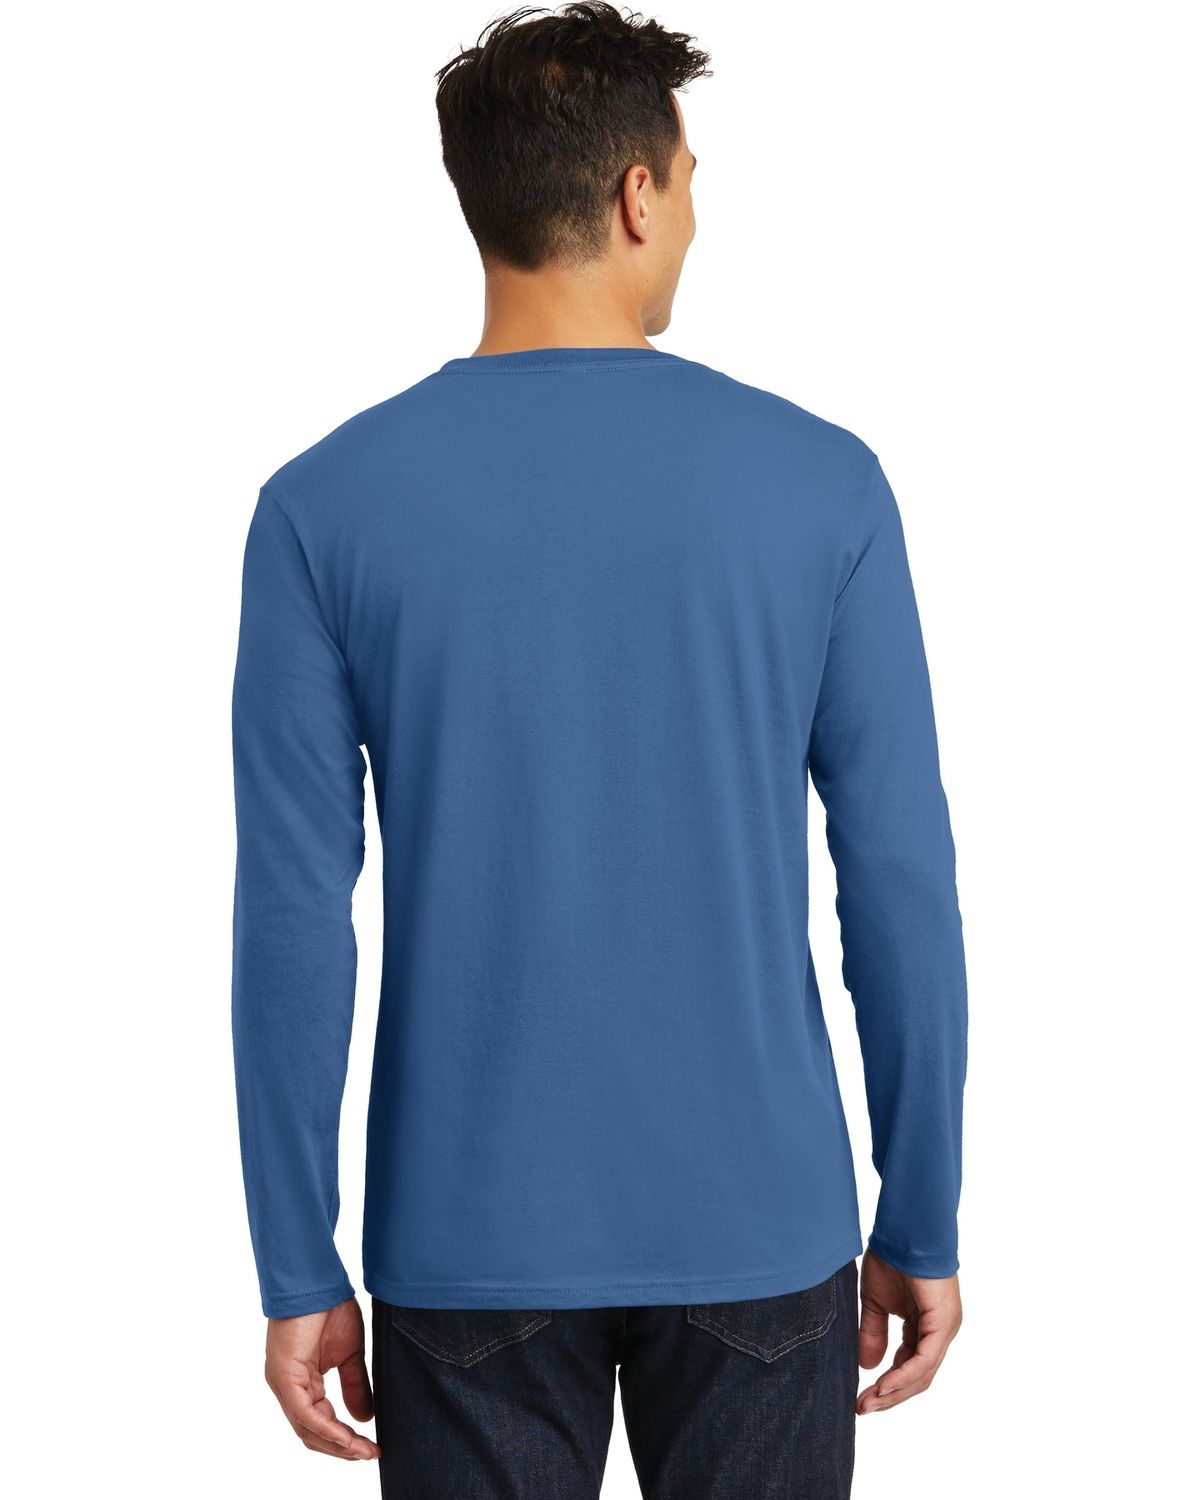 District DT105 Mens Perfect Weight Long Sleeve Tee-Veetrends.com